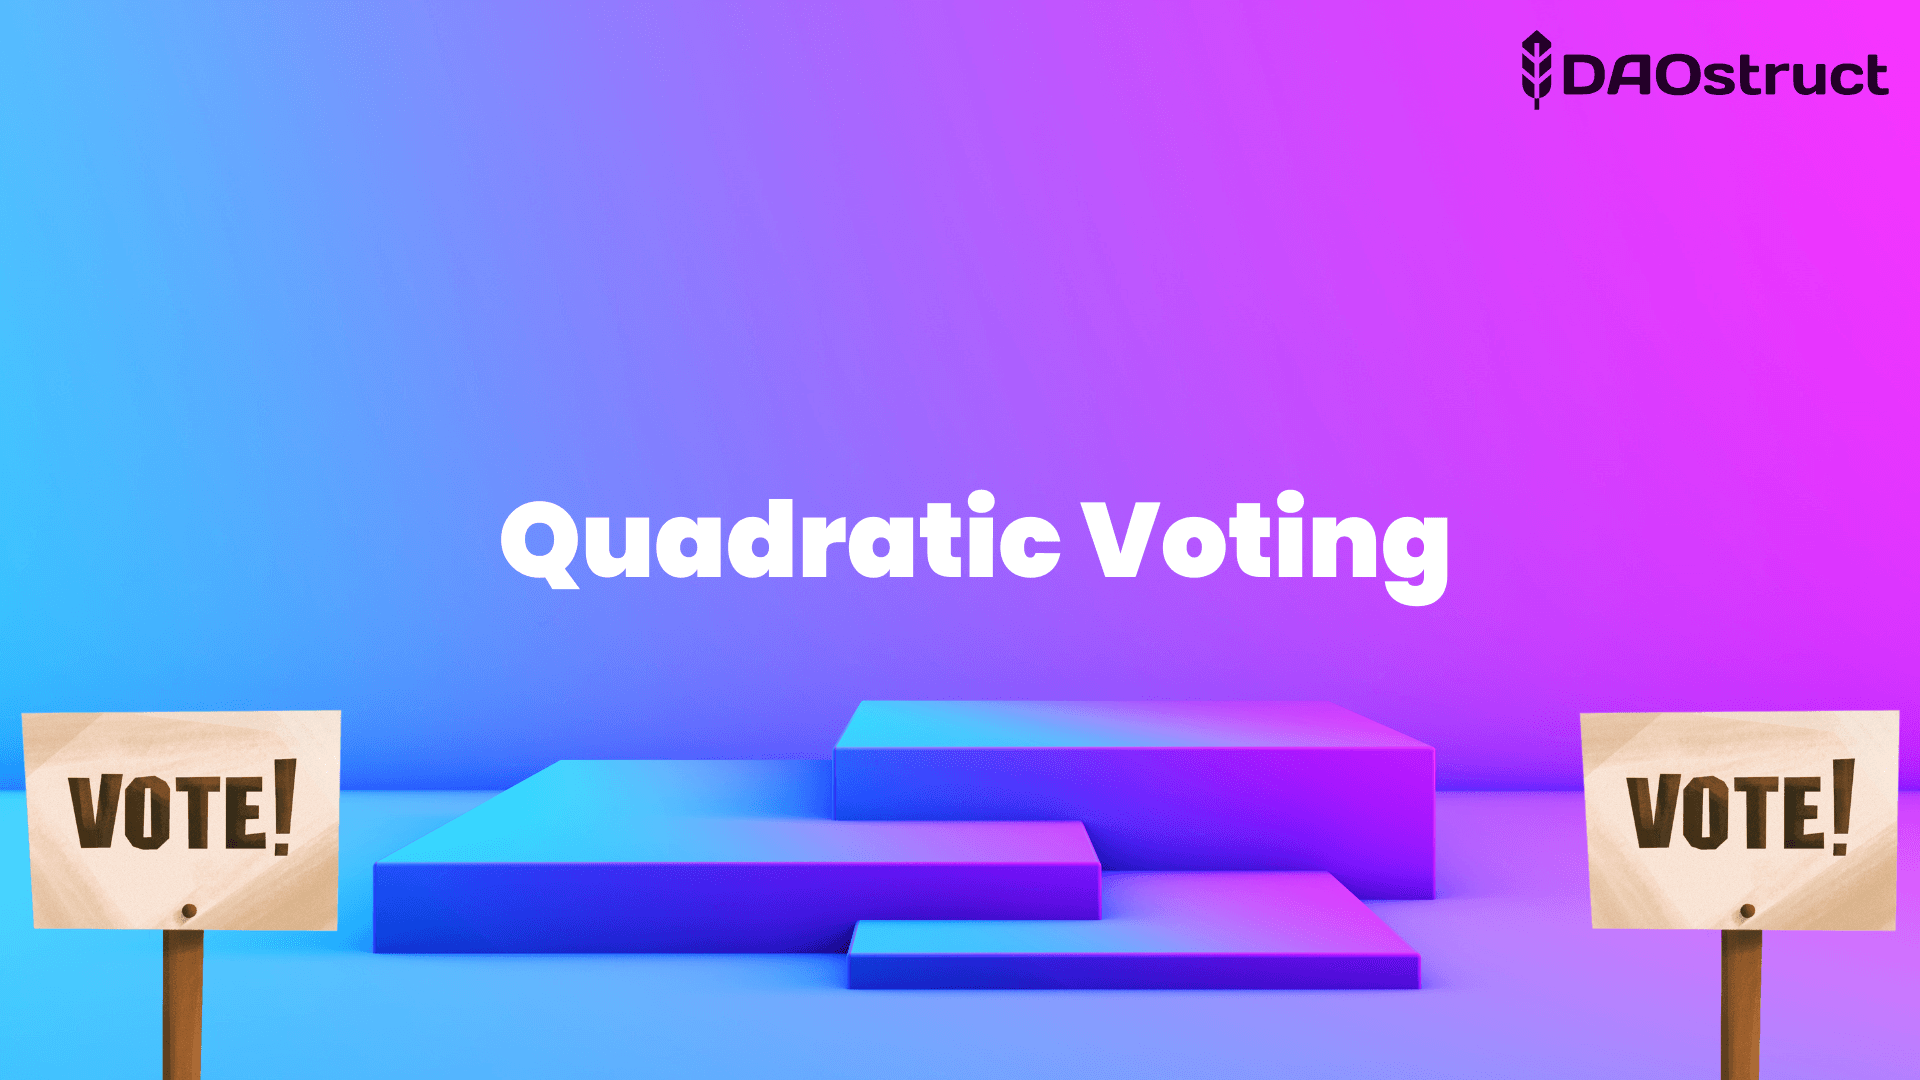 The Hottest Trend in DAOs Right Now - Quadratic Voting! 